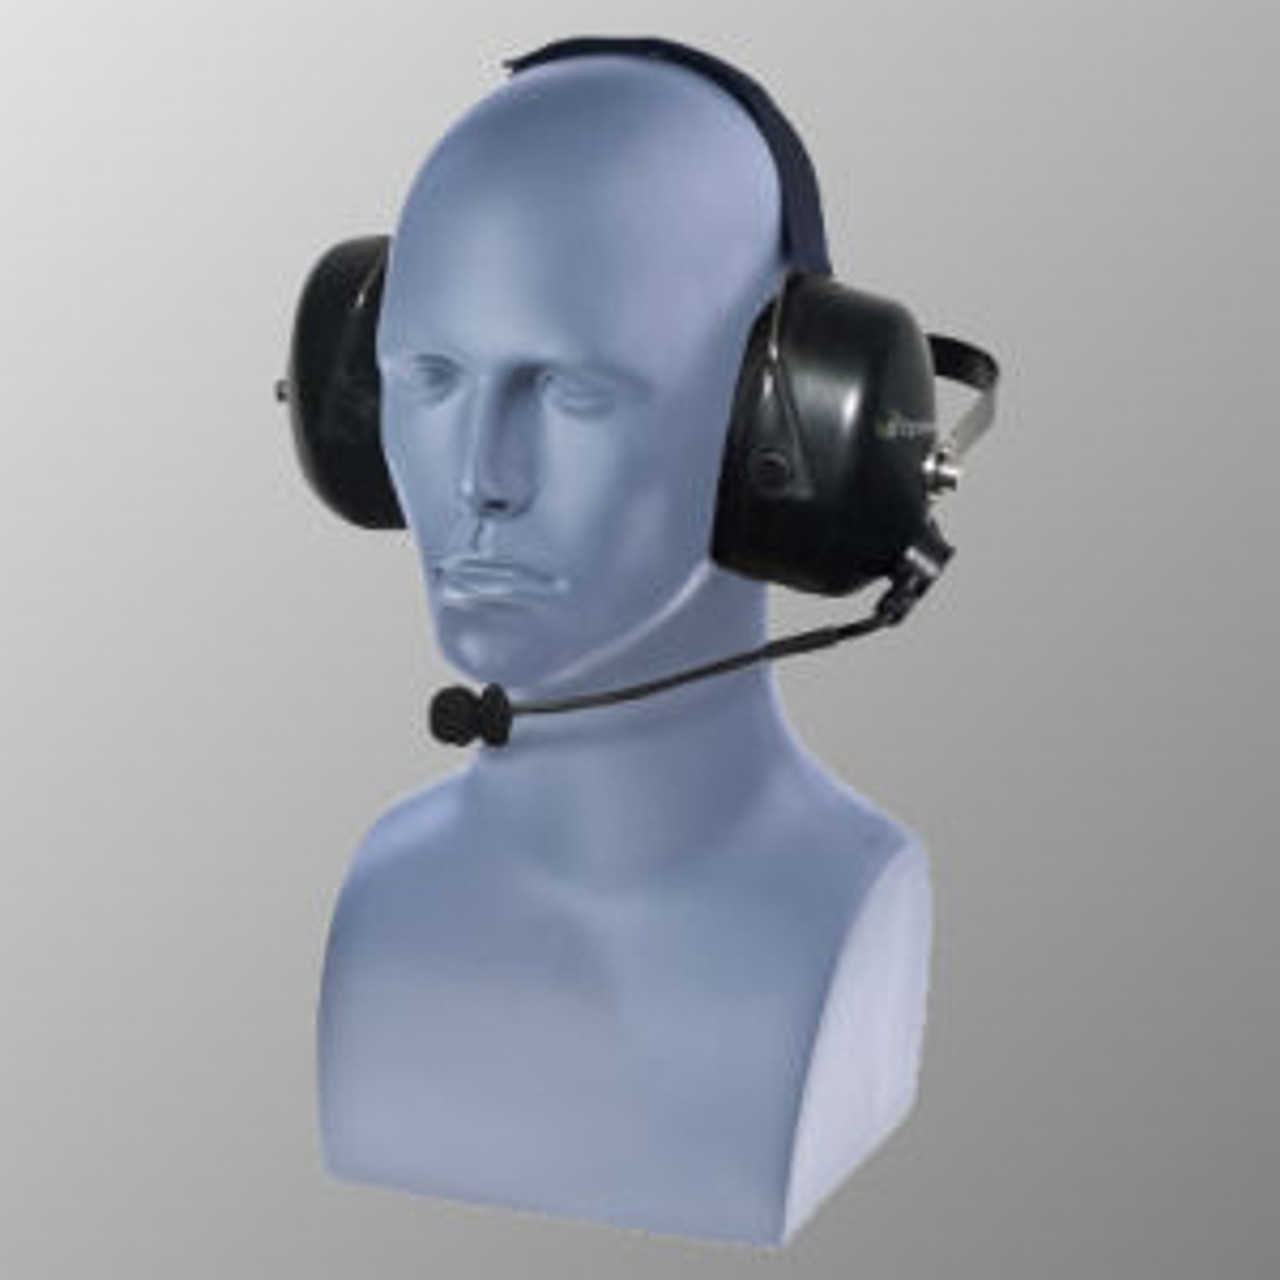 Motorola APX7000 Noise Canceling Double Muff Behind The Head Headset